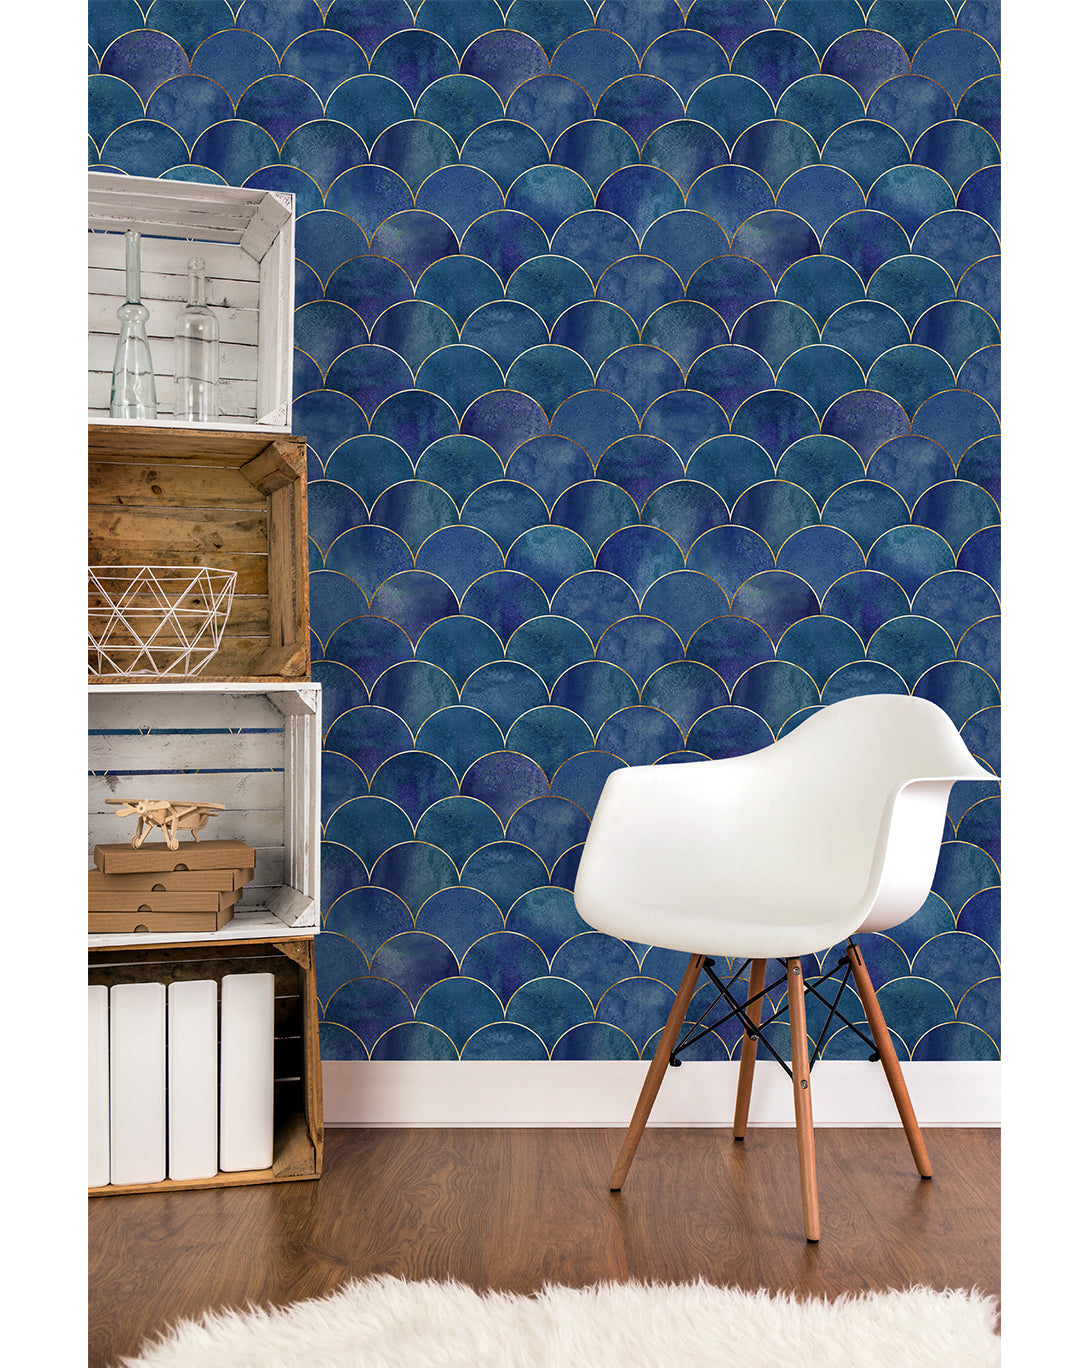 What is self adhesive removable wallpaper